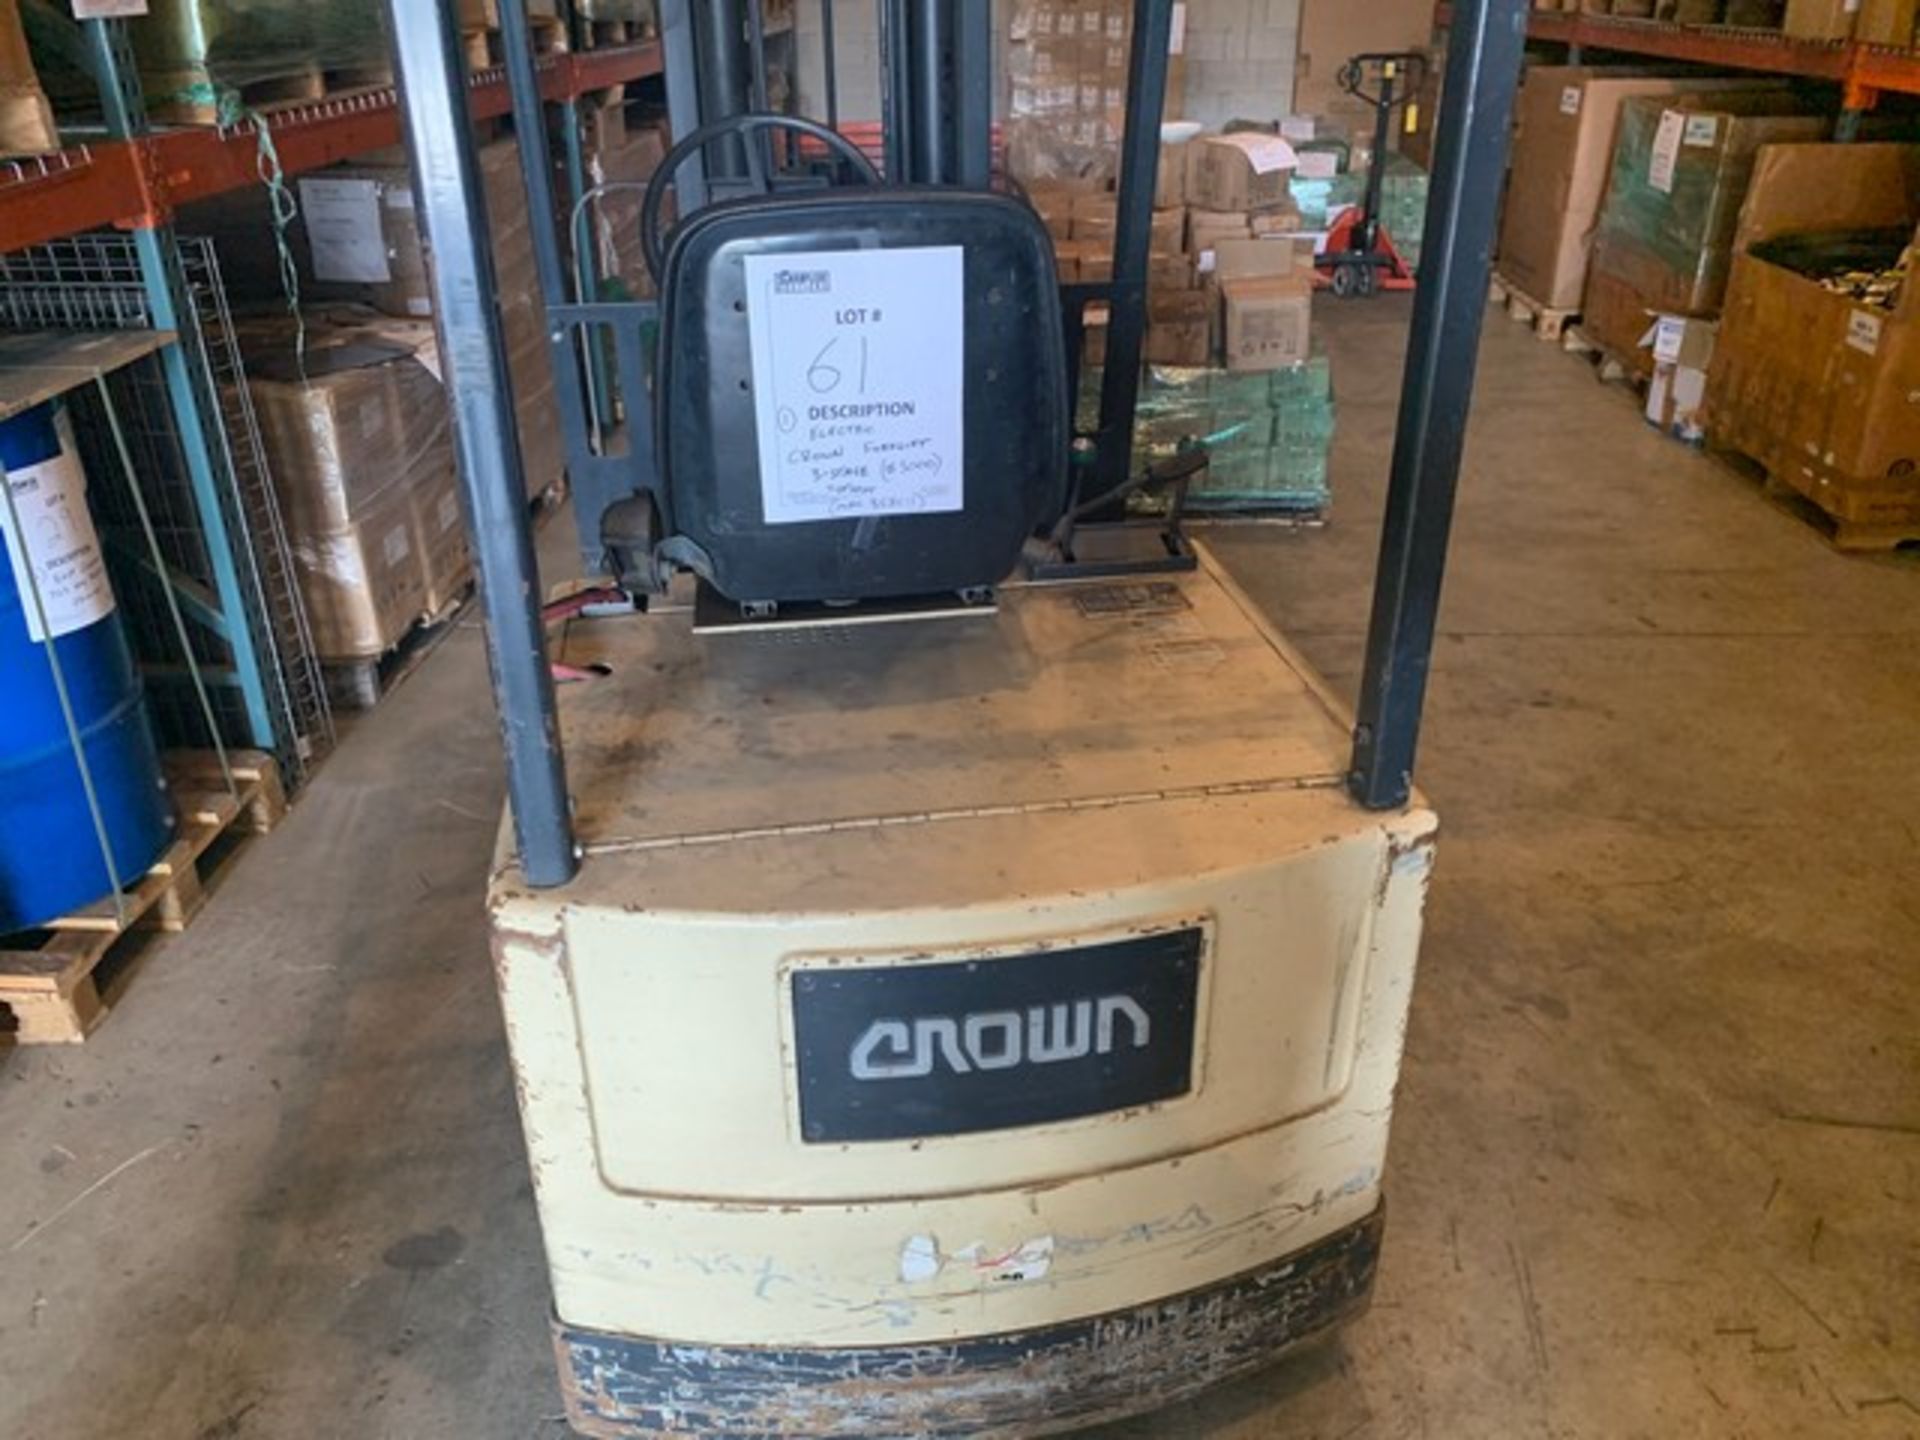 CROWN 35SC11 ELECTRIC FORKLIFT - 3 STAGE / SIDE SHIFT / 3000LB CAPACITY - GREY - Image 5 of 8